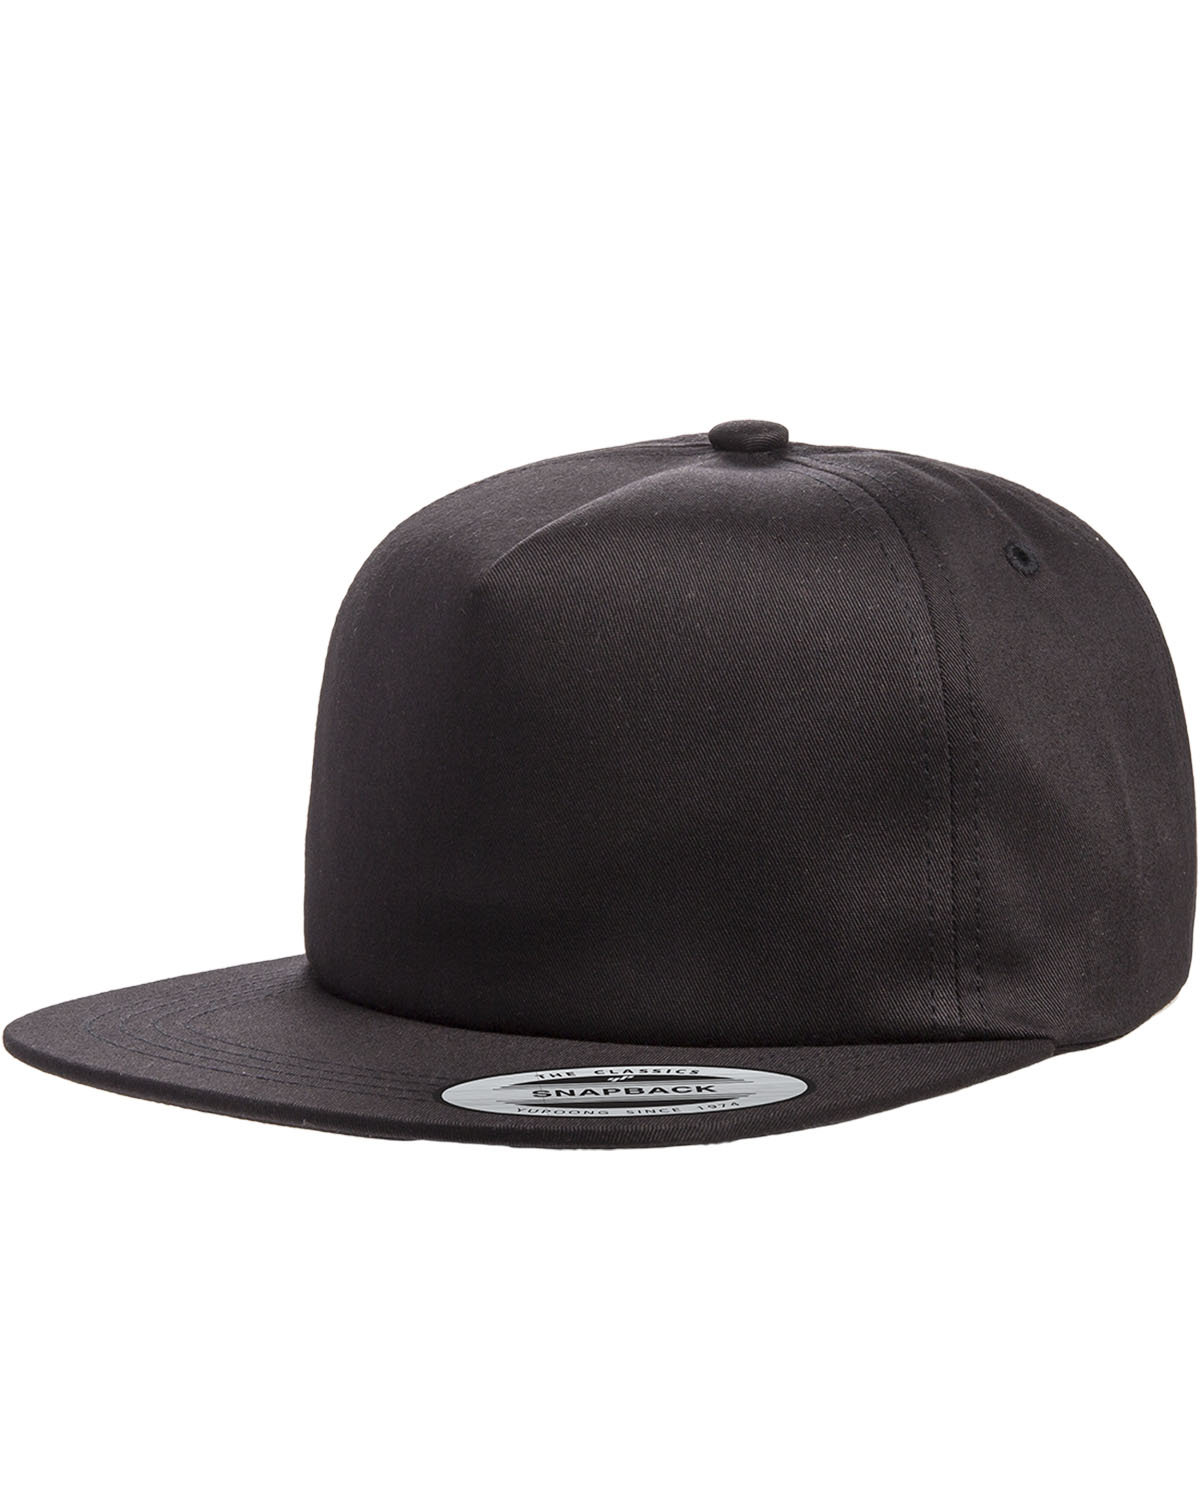 Yupoong Adult Unstructured 5-Panel Snapback Cap | Generic Site - Priced